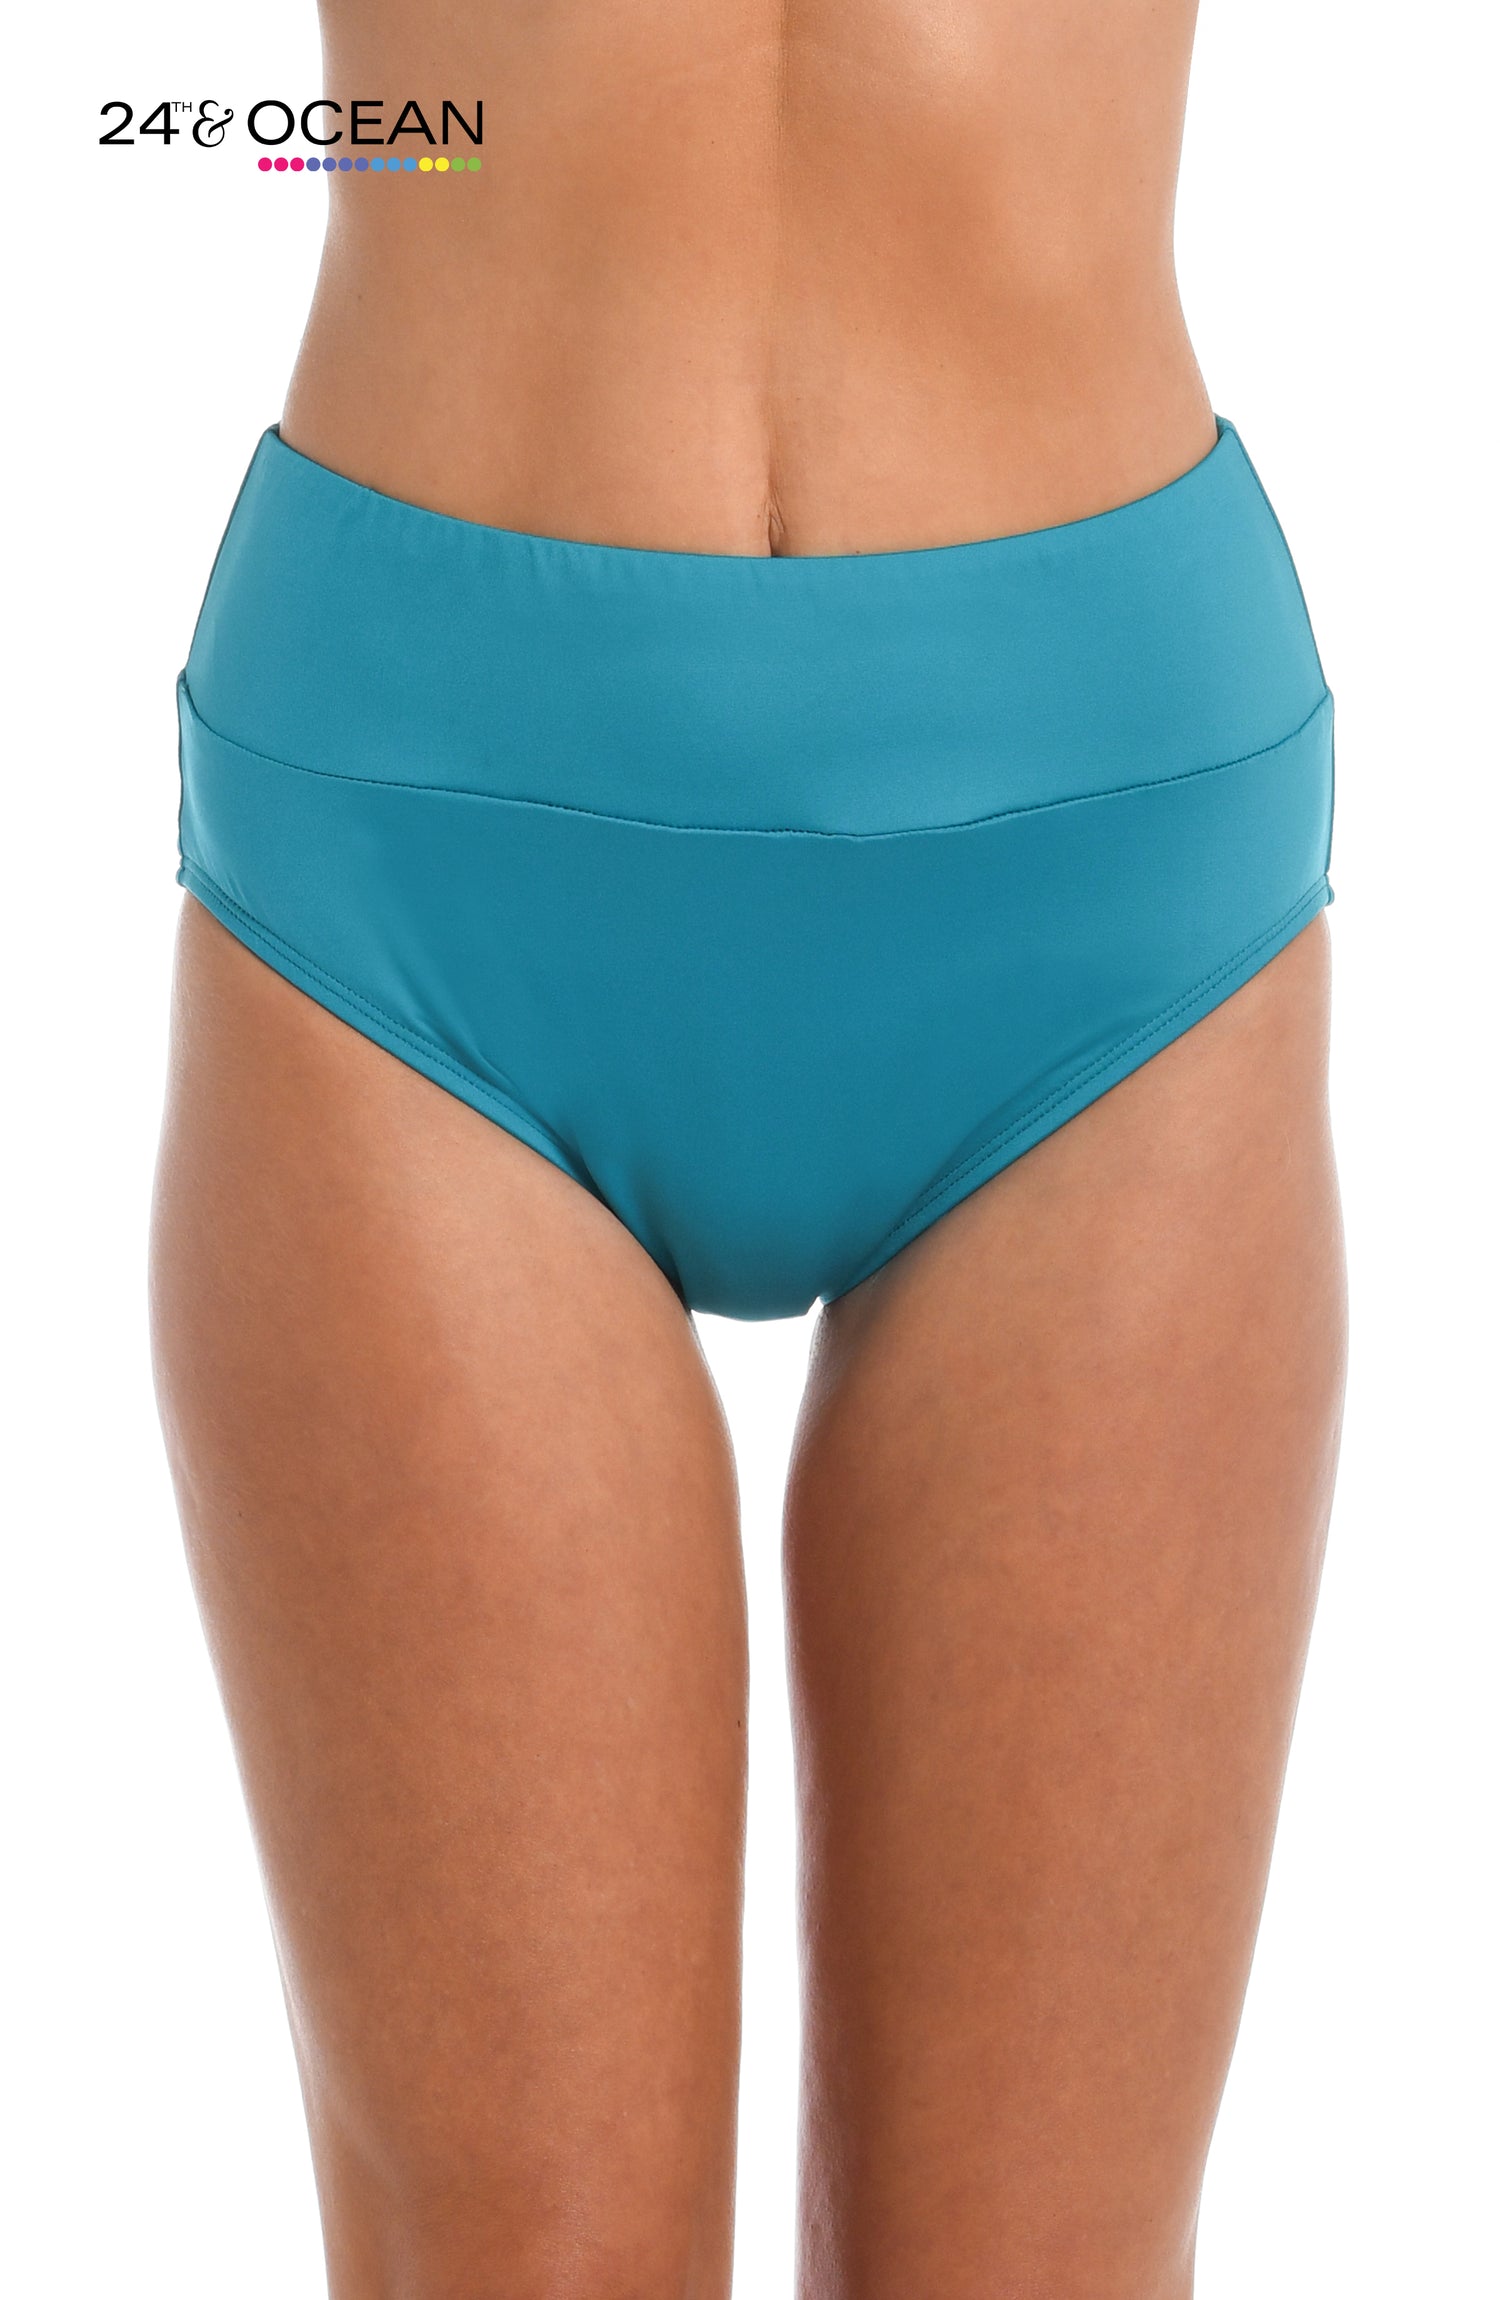 Model is wearing a solid teal colored high waist bikini bottom from our 24th & Ocean brand.